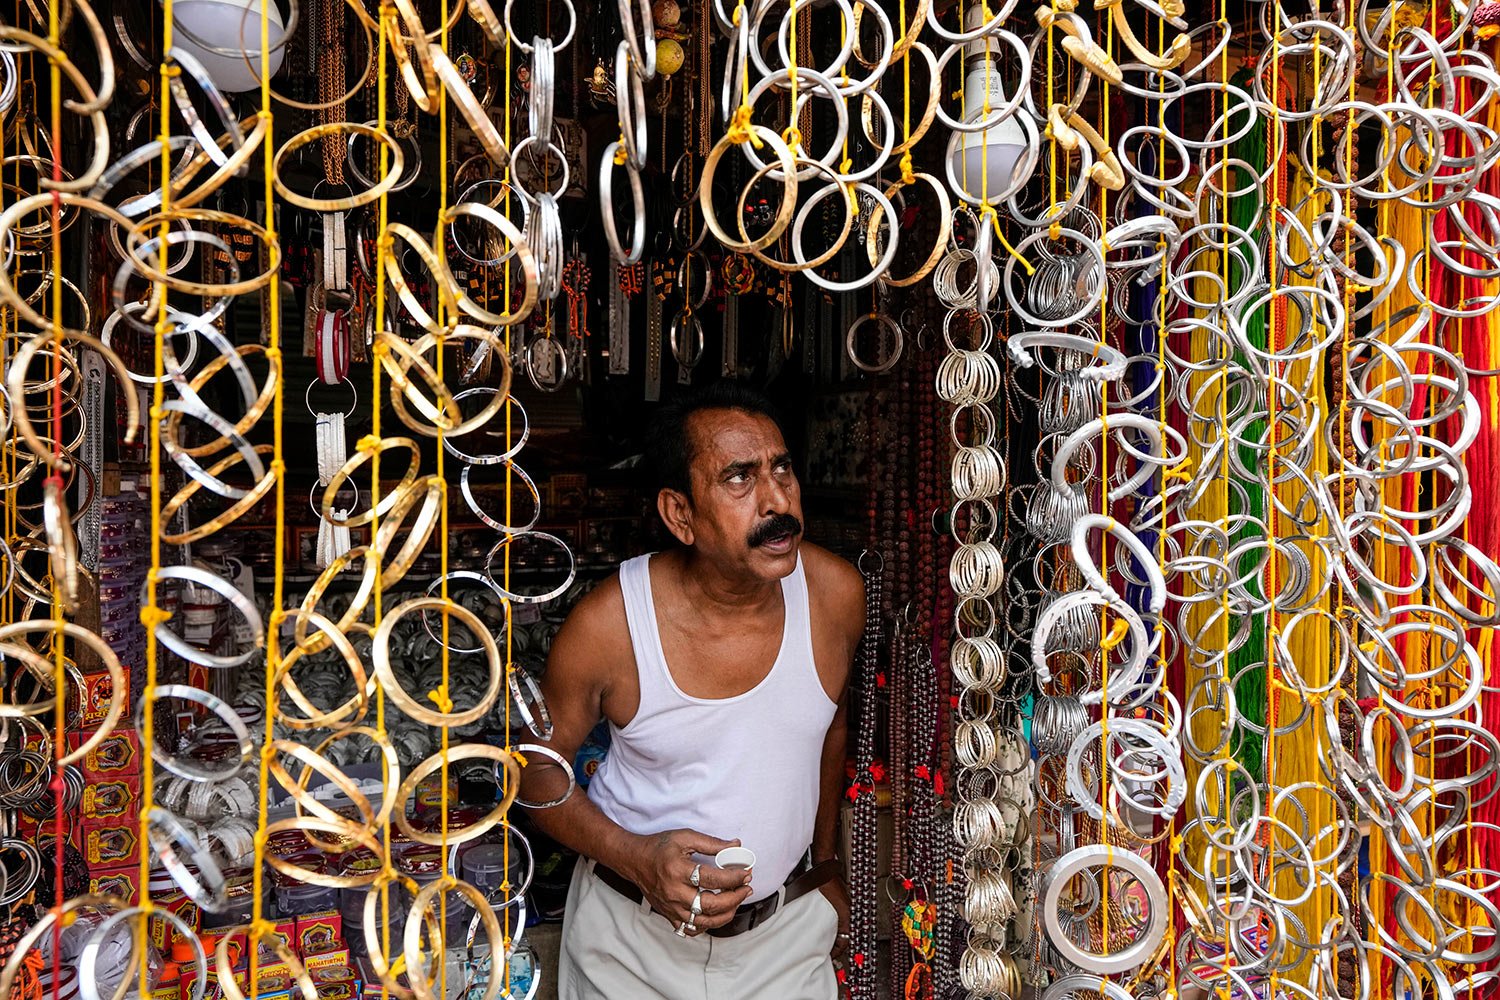  A shopkeeper waits for customers for bangles on sale at his shop on Bengali New Year's day in Kolkata, India, Friday, April 15, 2022. (AP Photo/Bikas Das) 